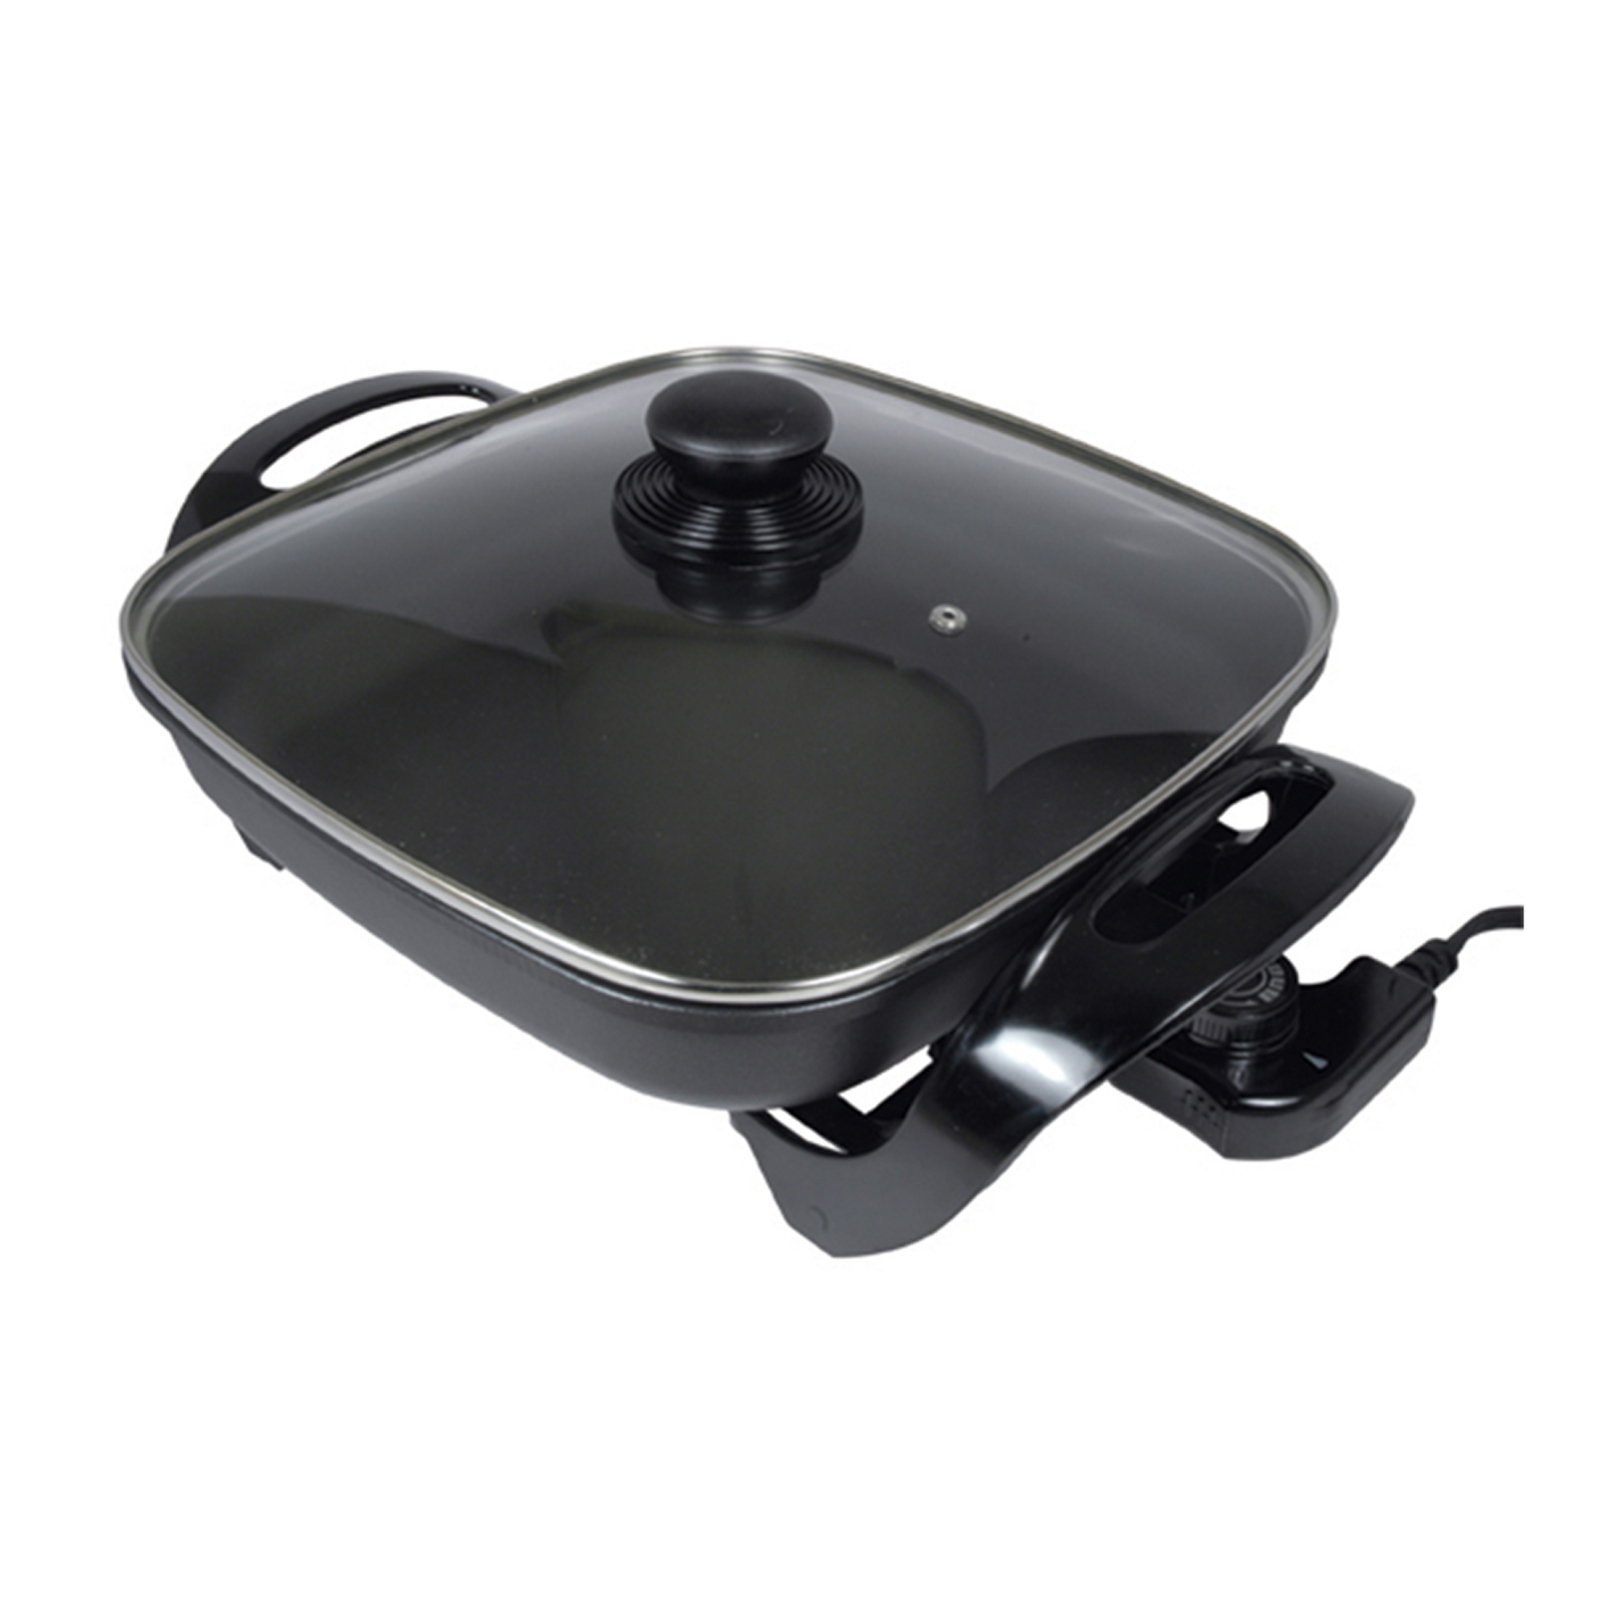 Better Chef 97095681M 11.5" Nonstick Electric Skillet